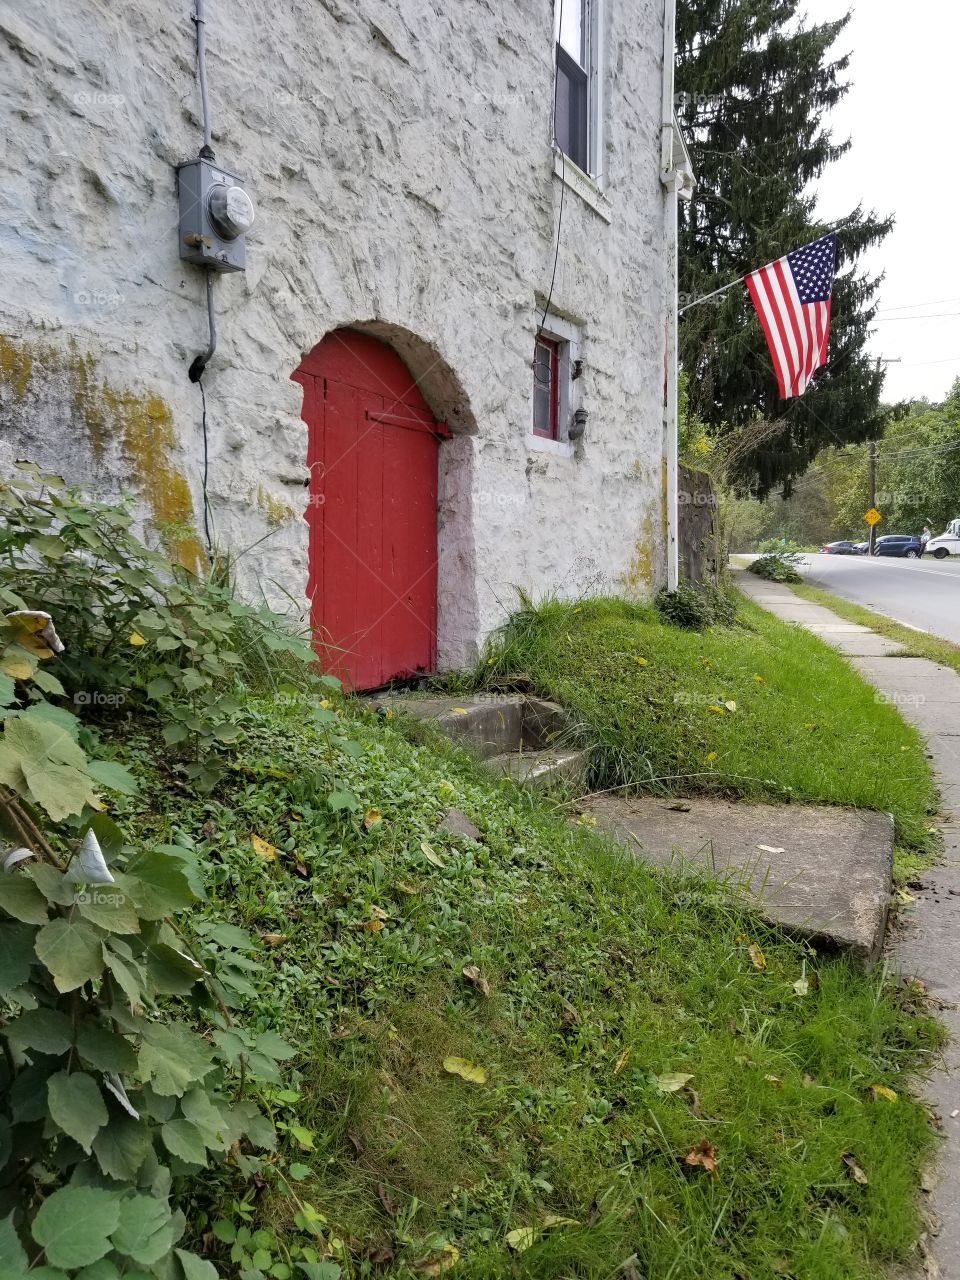 the red door and American flag